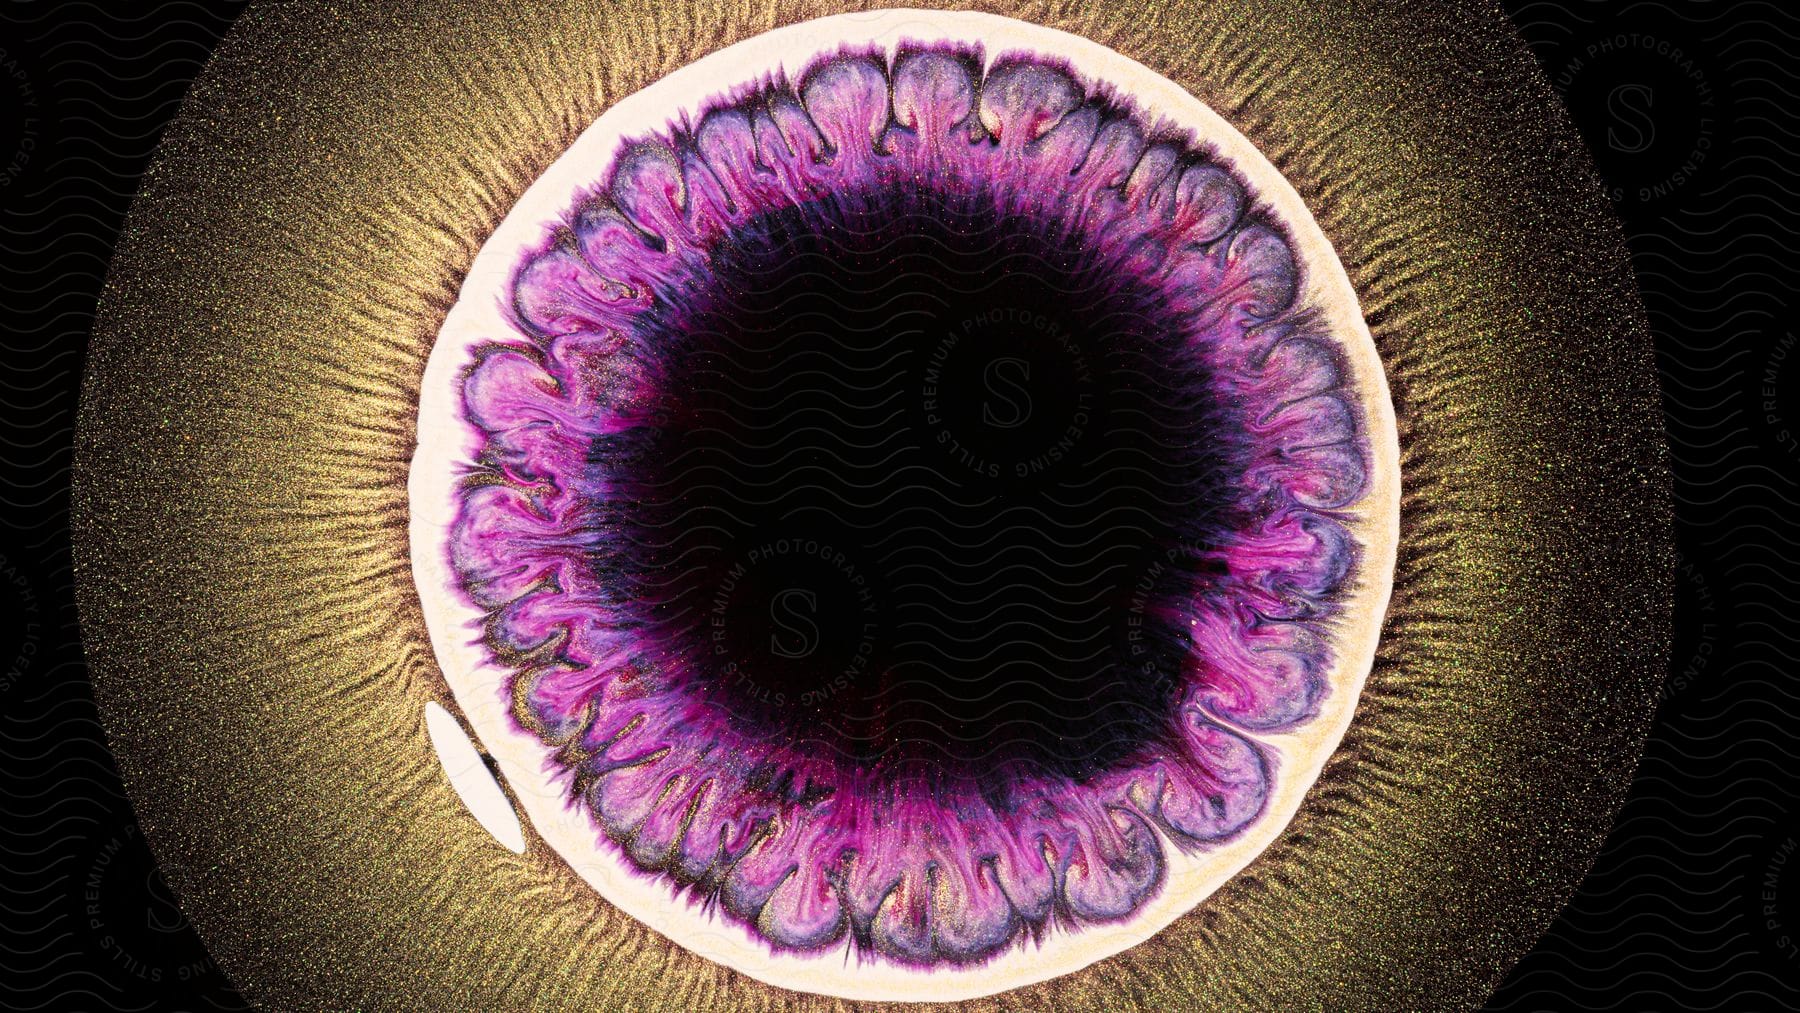 An eye like structure has purple like color inside the white round structure.